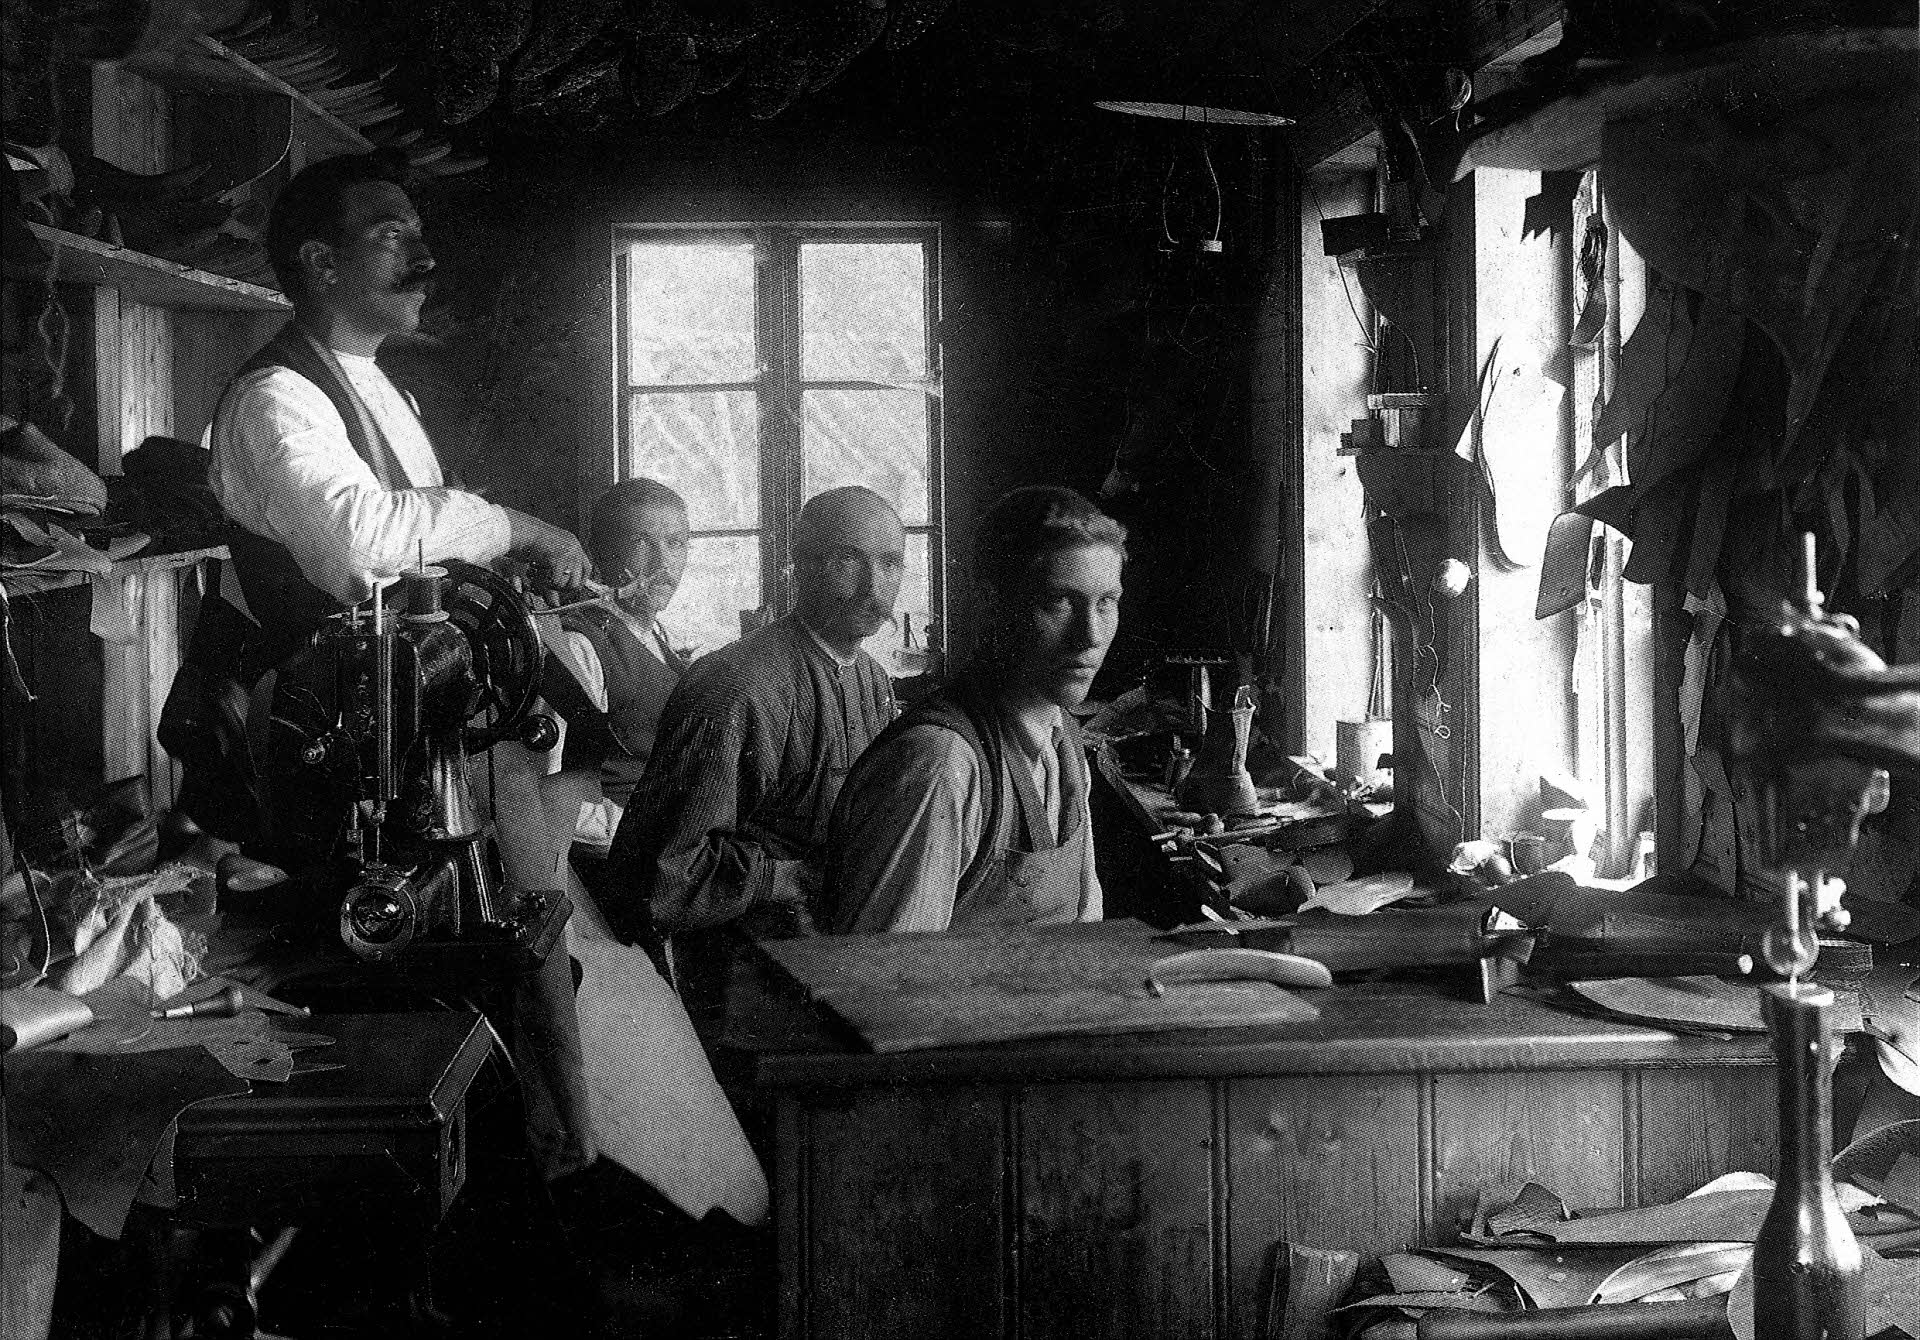 Historic photo of four men with moustache and serious faces in the 1930's sitting and working in the Aurland Shoe Factory.